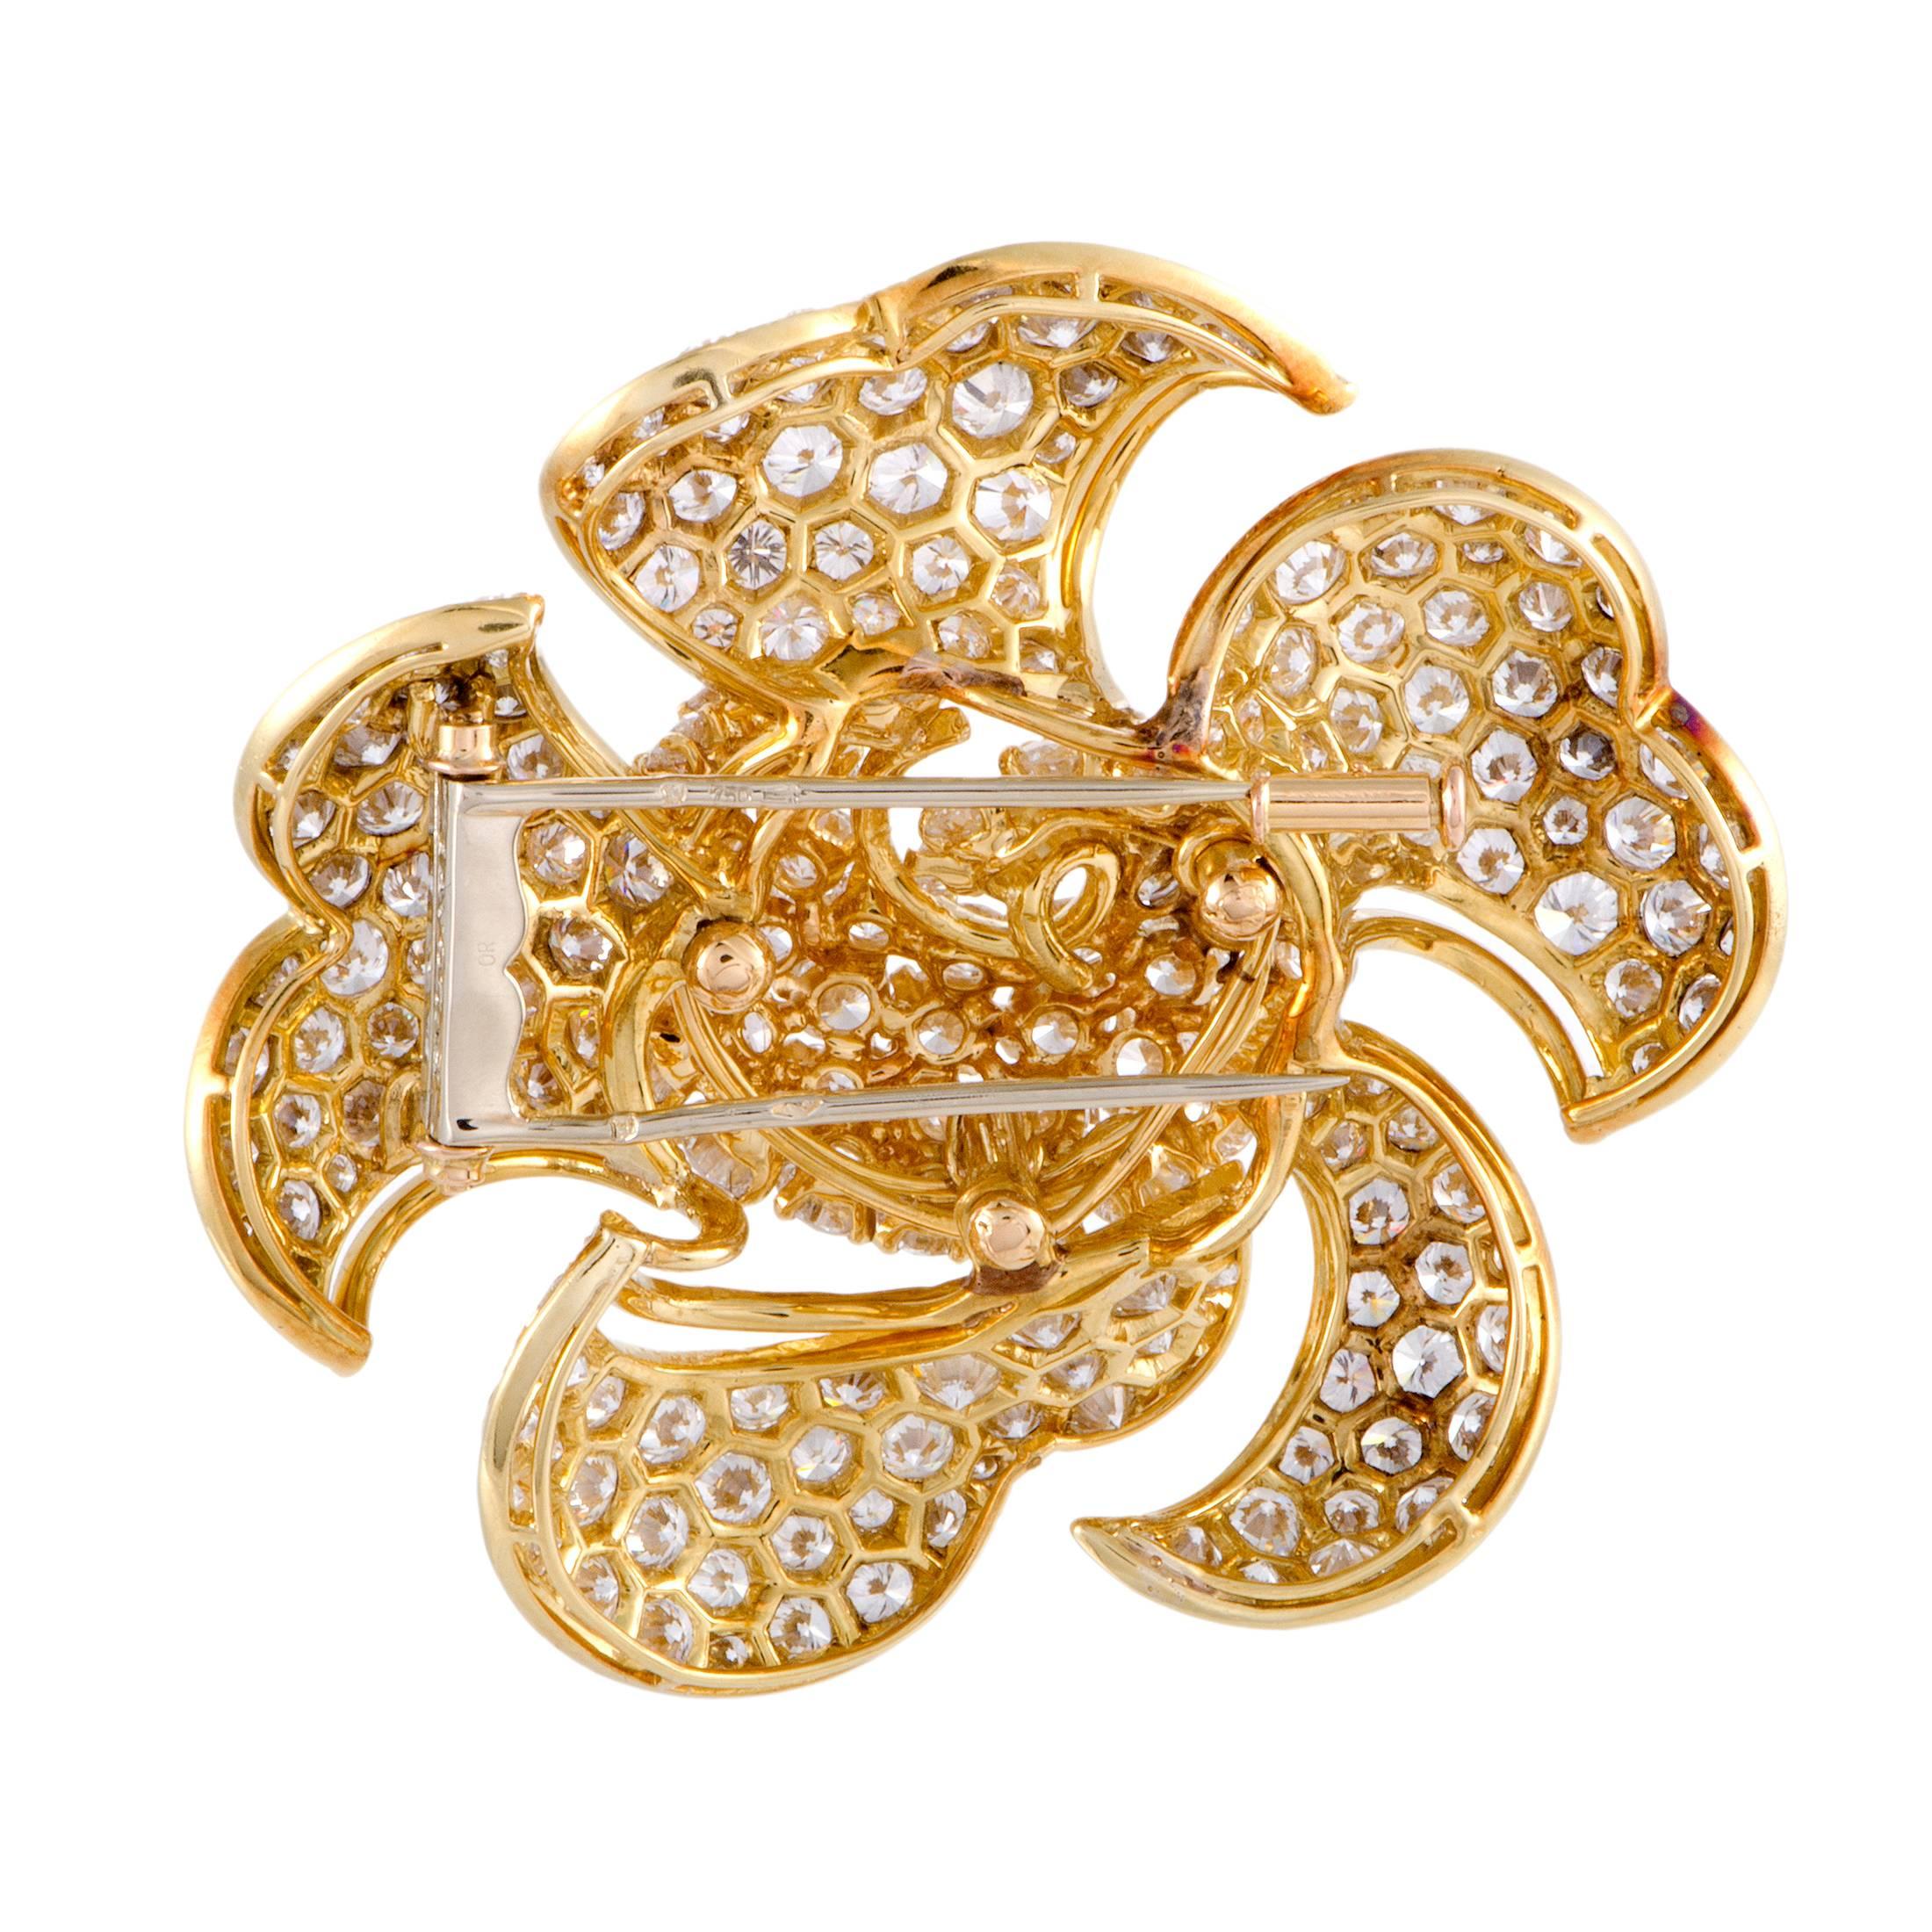 Exceptionally lavish, fabulously glamorous and simply spellbinding, this gorgeous brooch from Bvlgari is made of luxurious 18K yellow gold and exquisitely adorned with resplendent diamonds weighing in total 34.00 carats for a majestic effect.